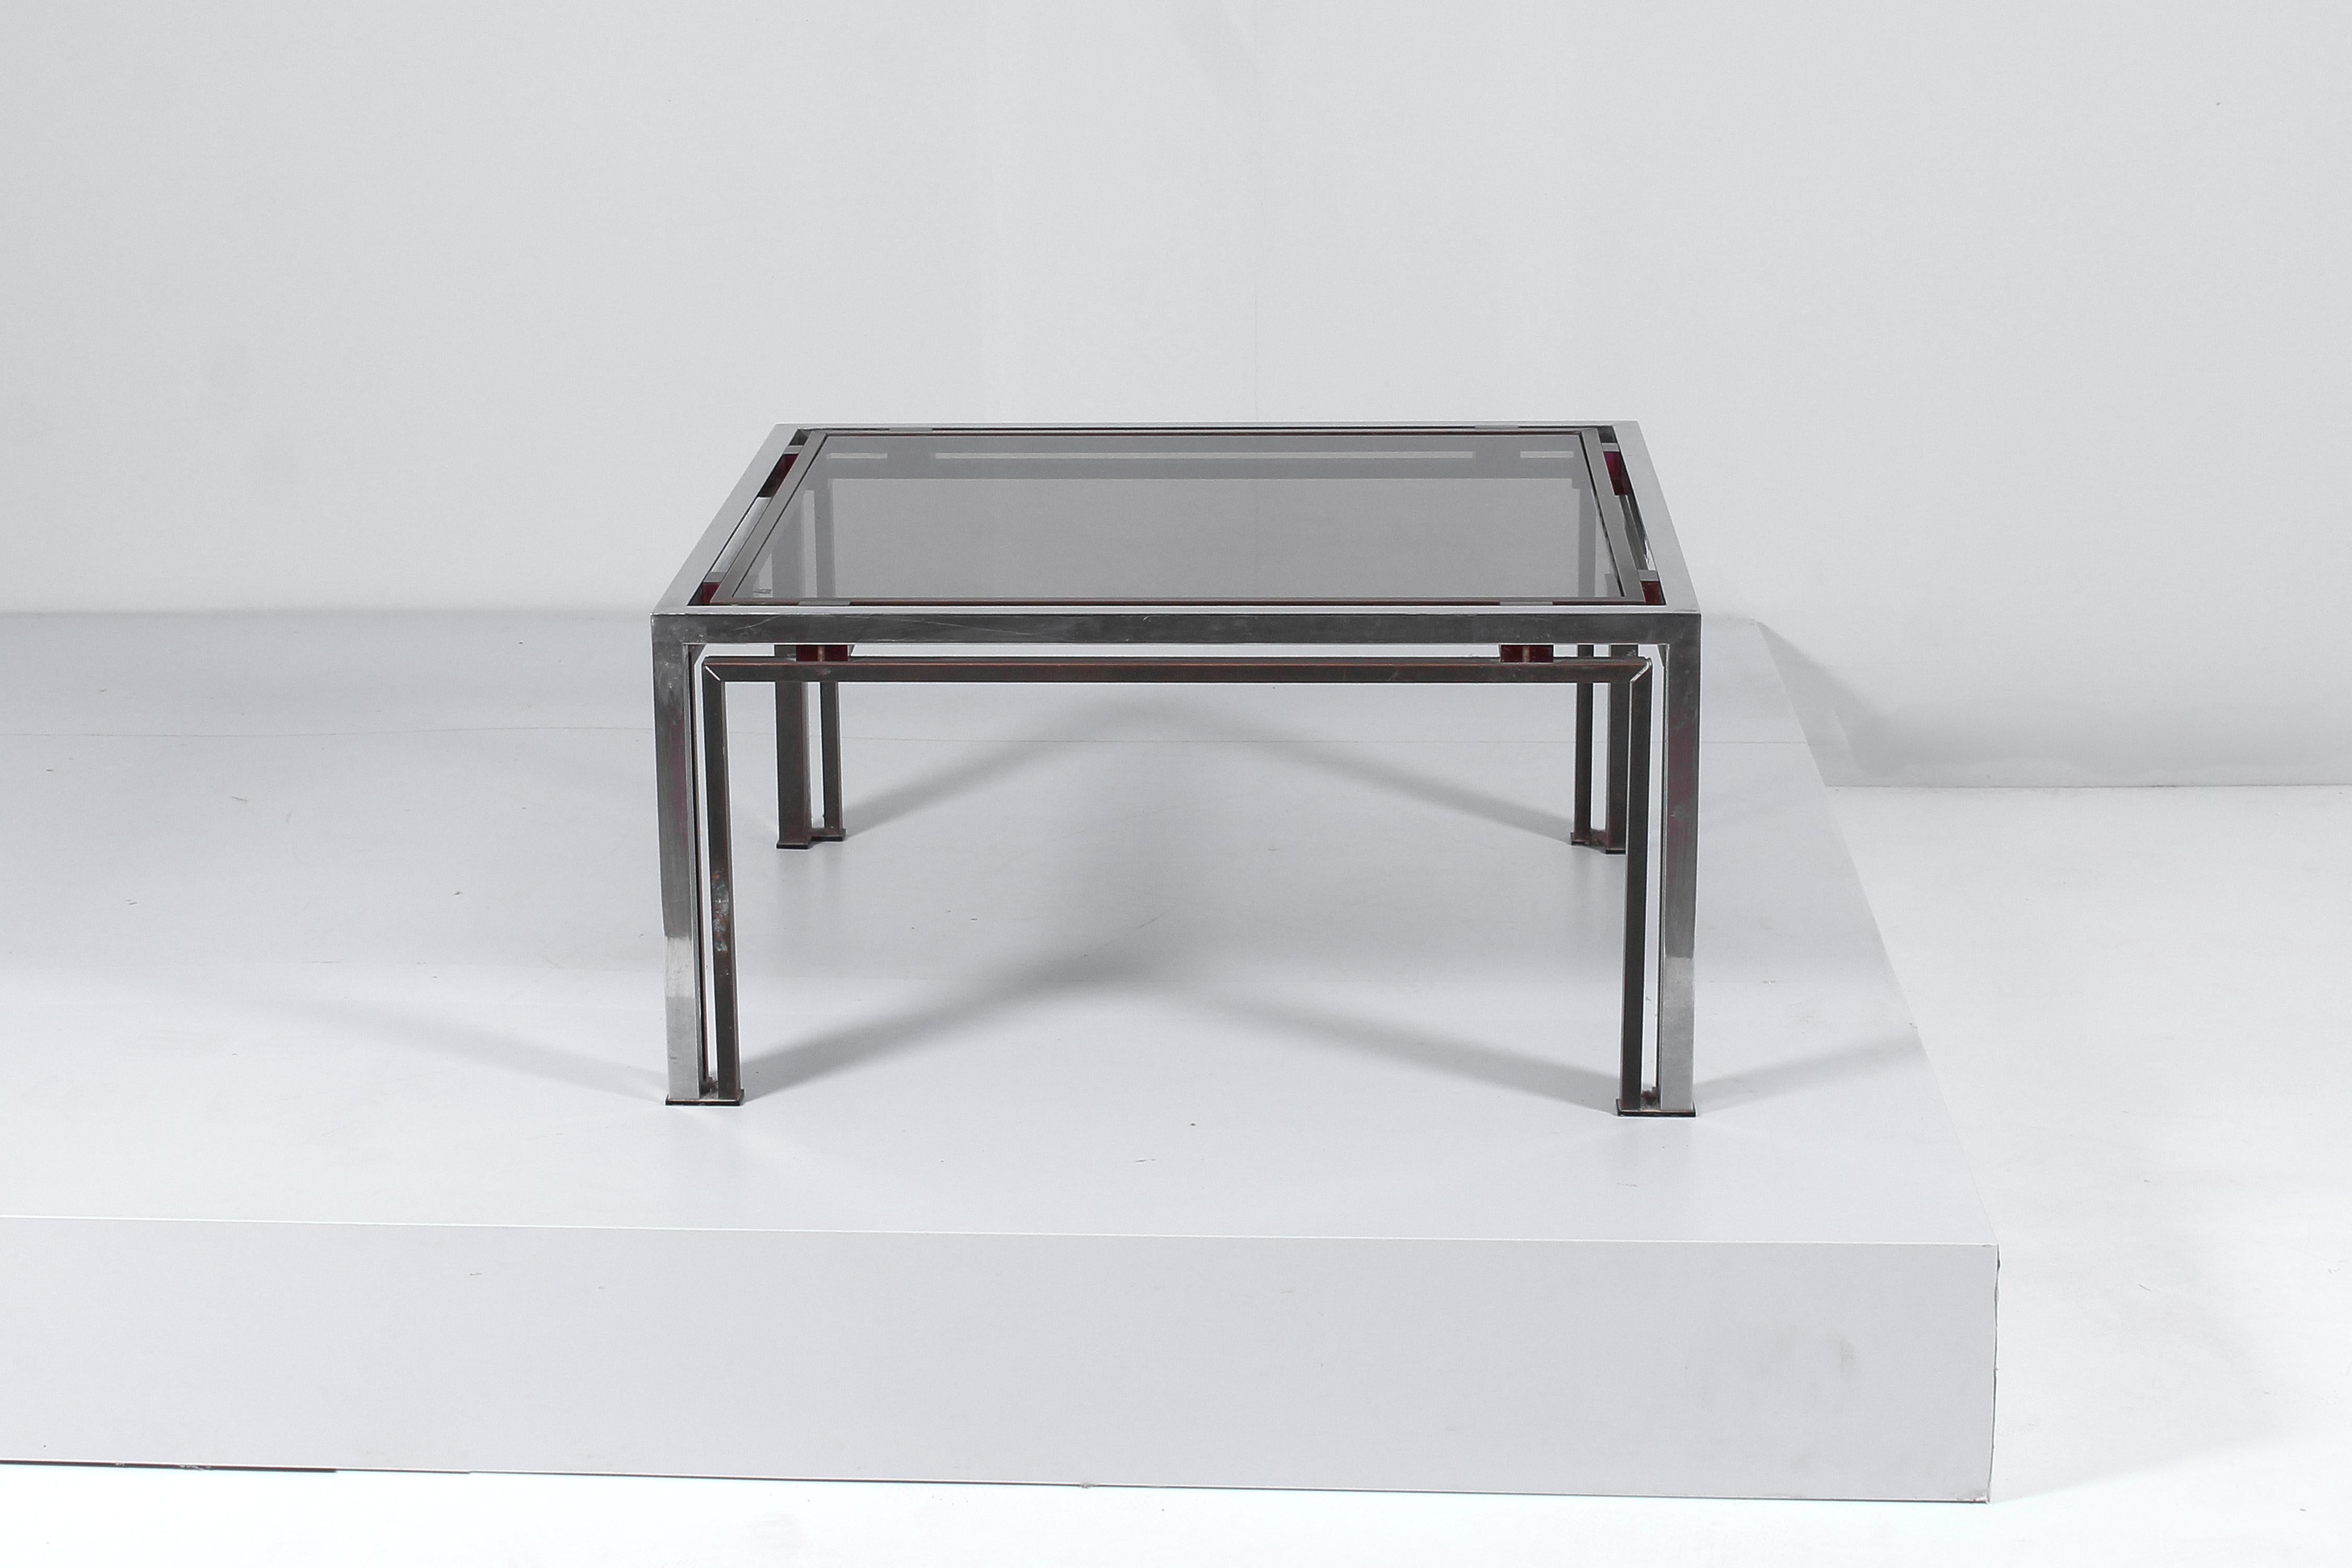 Coffee table in brass and chromed metal, Space Age genre, with geometric shapes with a square top in dark glass and support elements in red acrylic glass. By Romeo Rega for Nazareth, Italian production in the 70s.
Wear consistent with age and use.